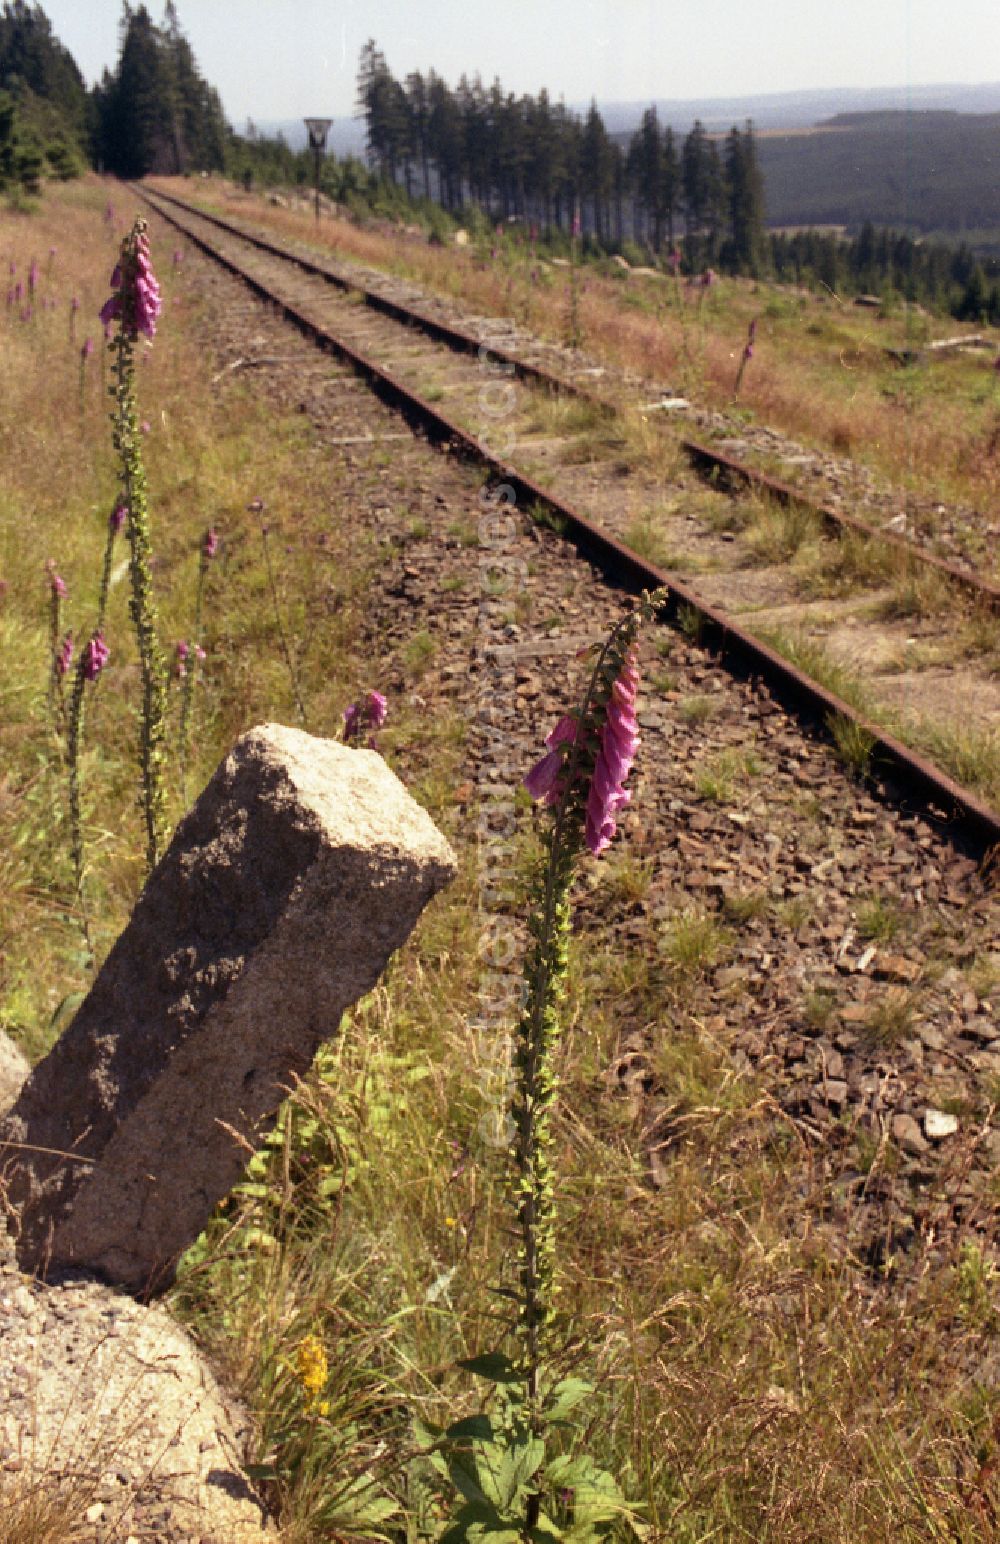 GDR photo archive: Schierke - Neglected track layout and track systems on the railway line on the summit plateau of the Brocken after its release for civilian visitor traffic in Schierke in the state of Saxony-Anhalt in the area of the former GDR, German Democratic Republic